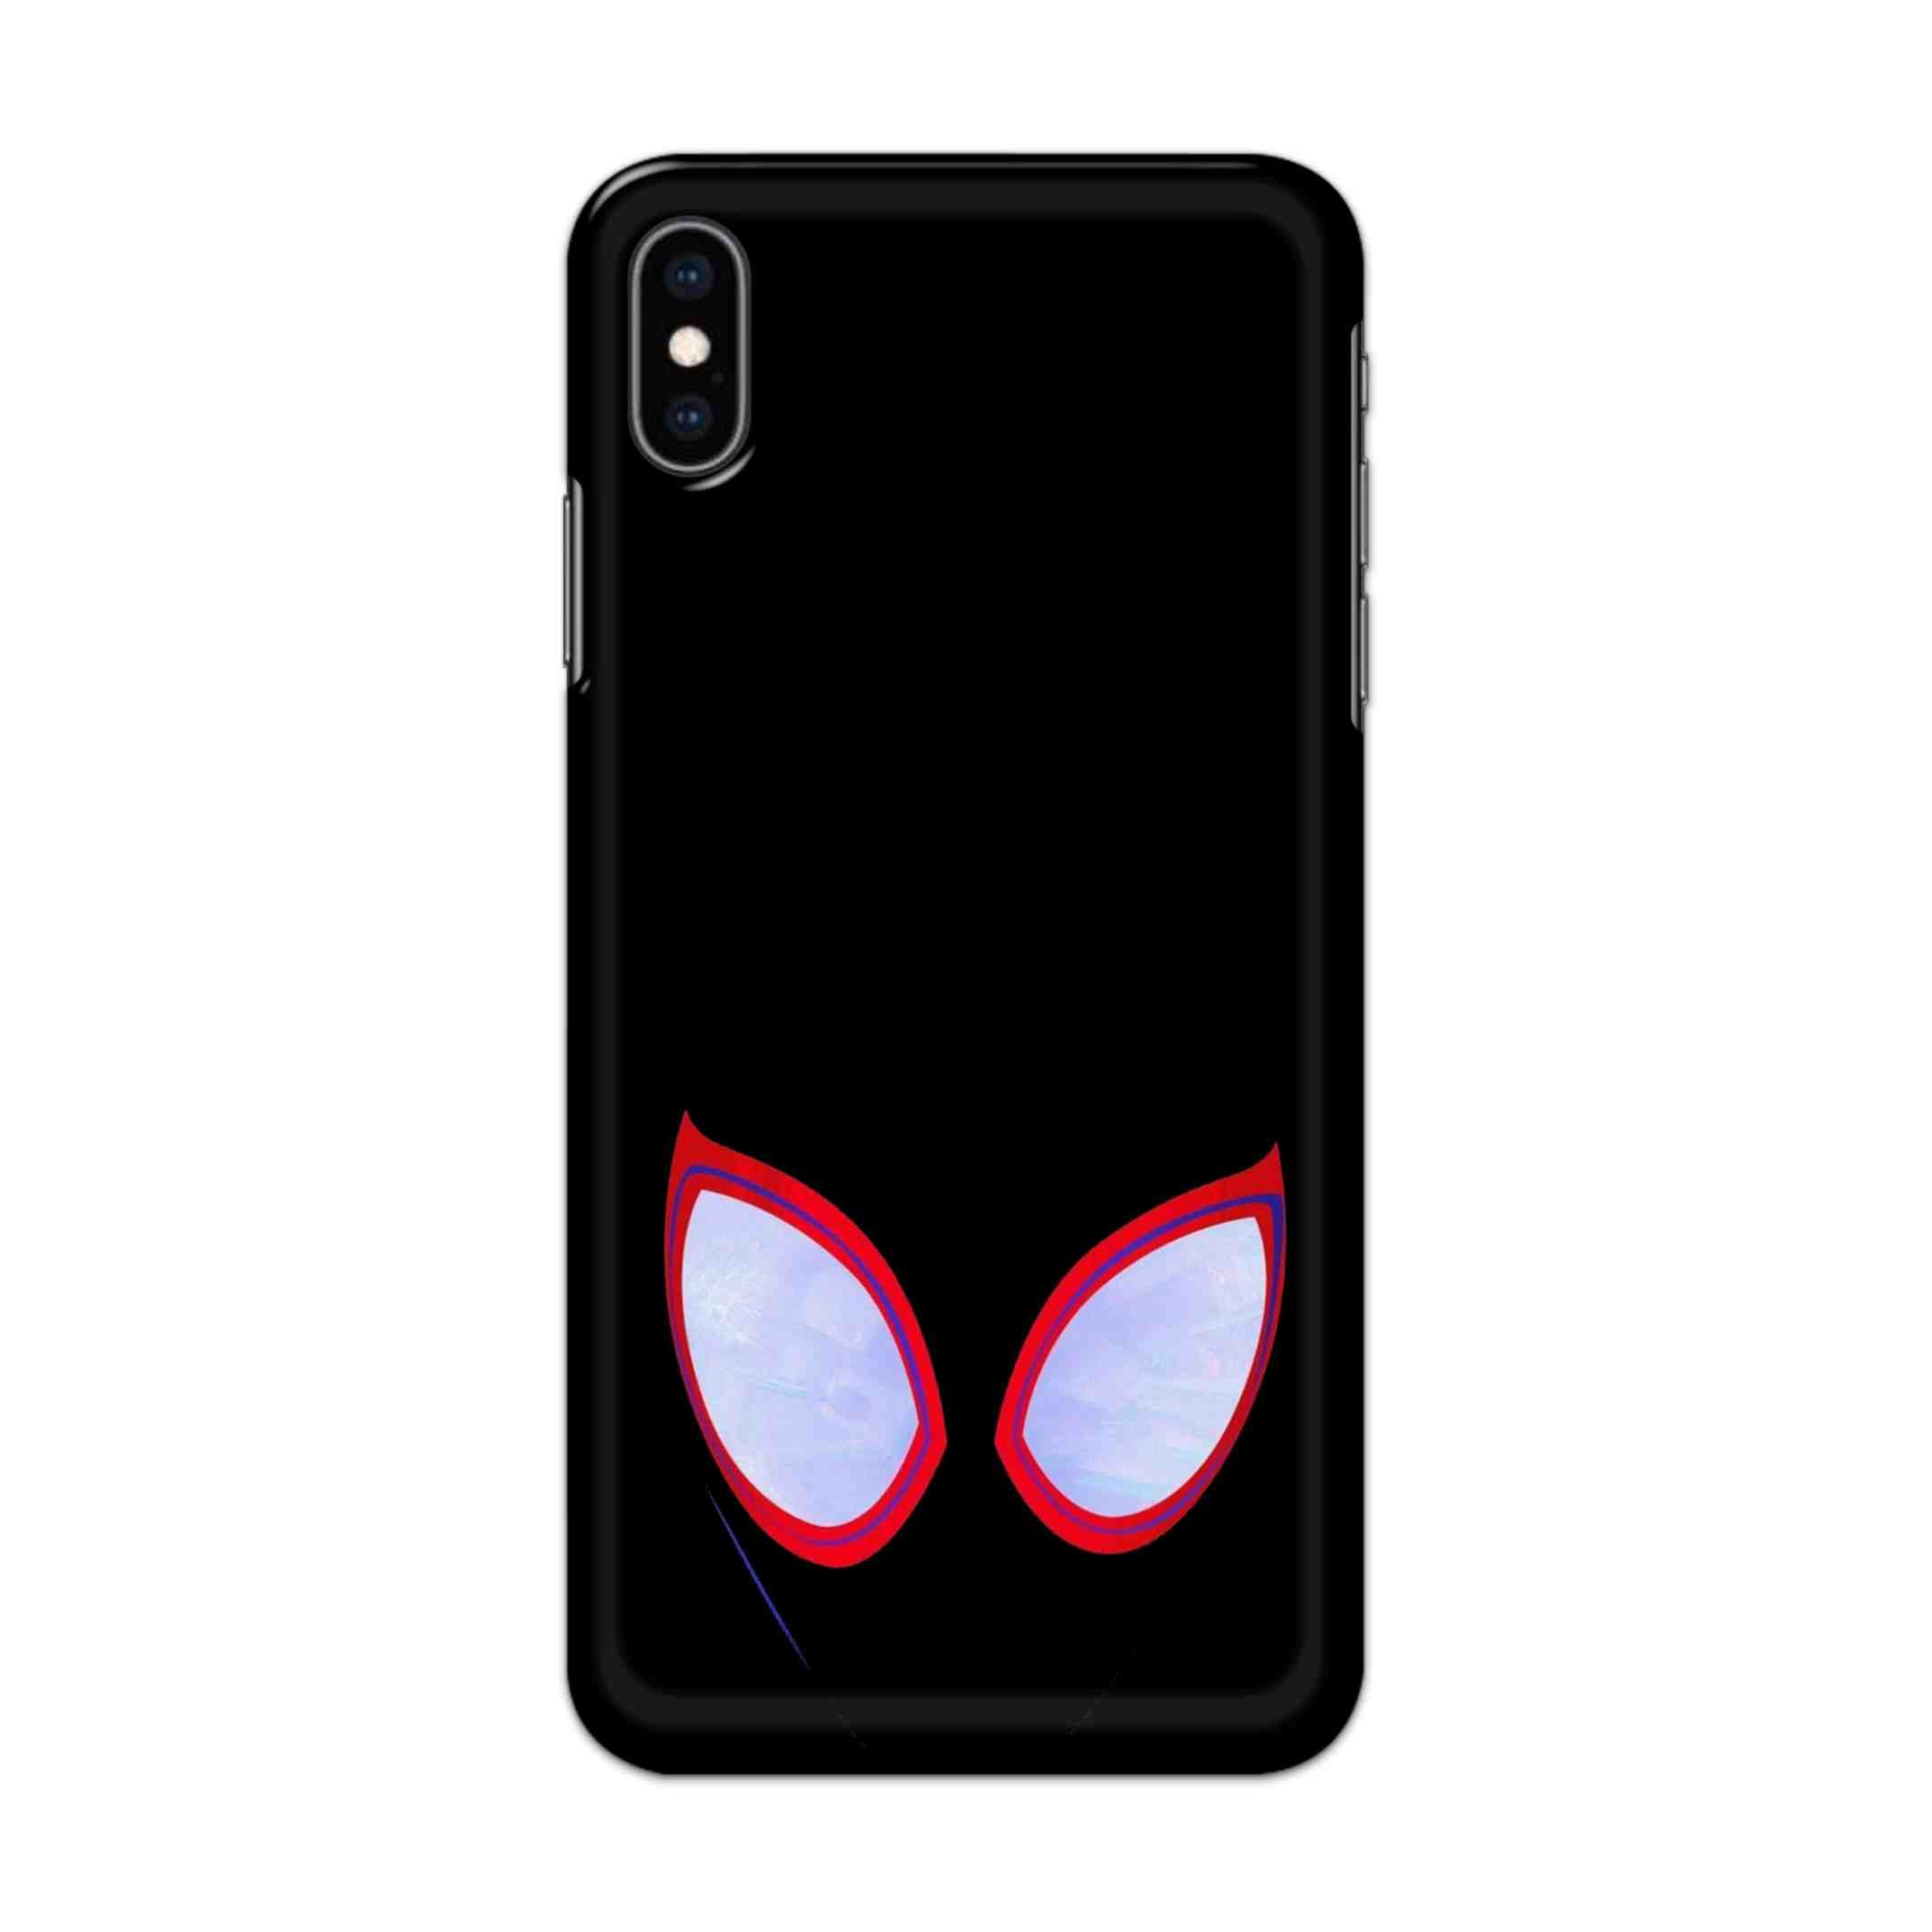 Buy Spiderman Eyes Hard Back Mobile Phone Case/Cover For iPhone XS MAX Online